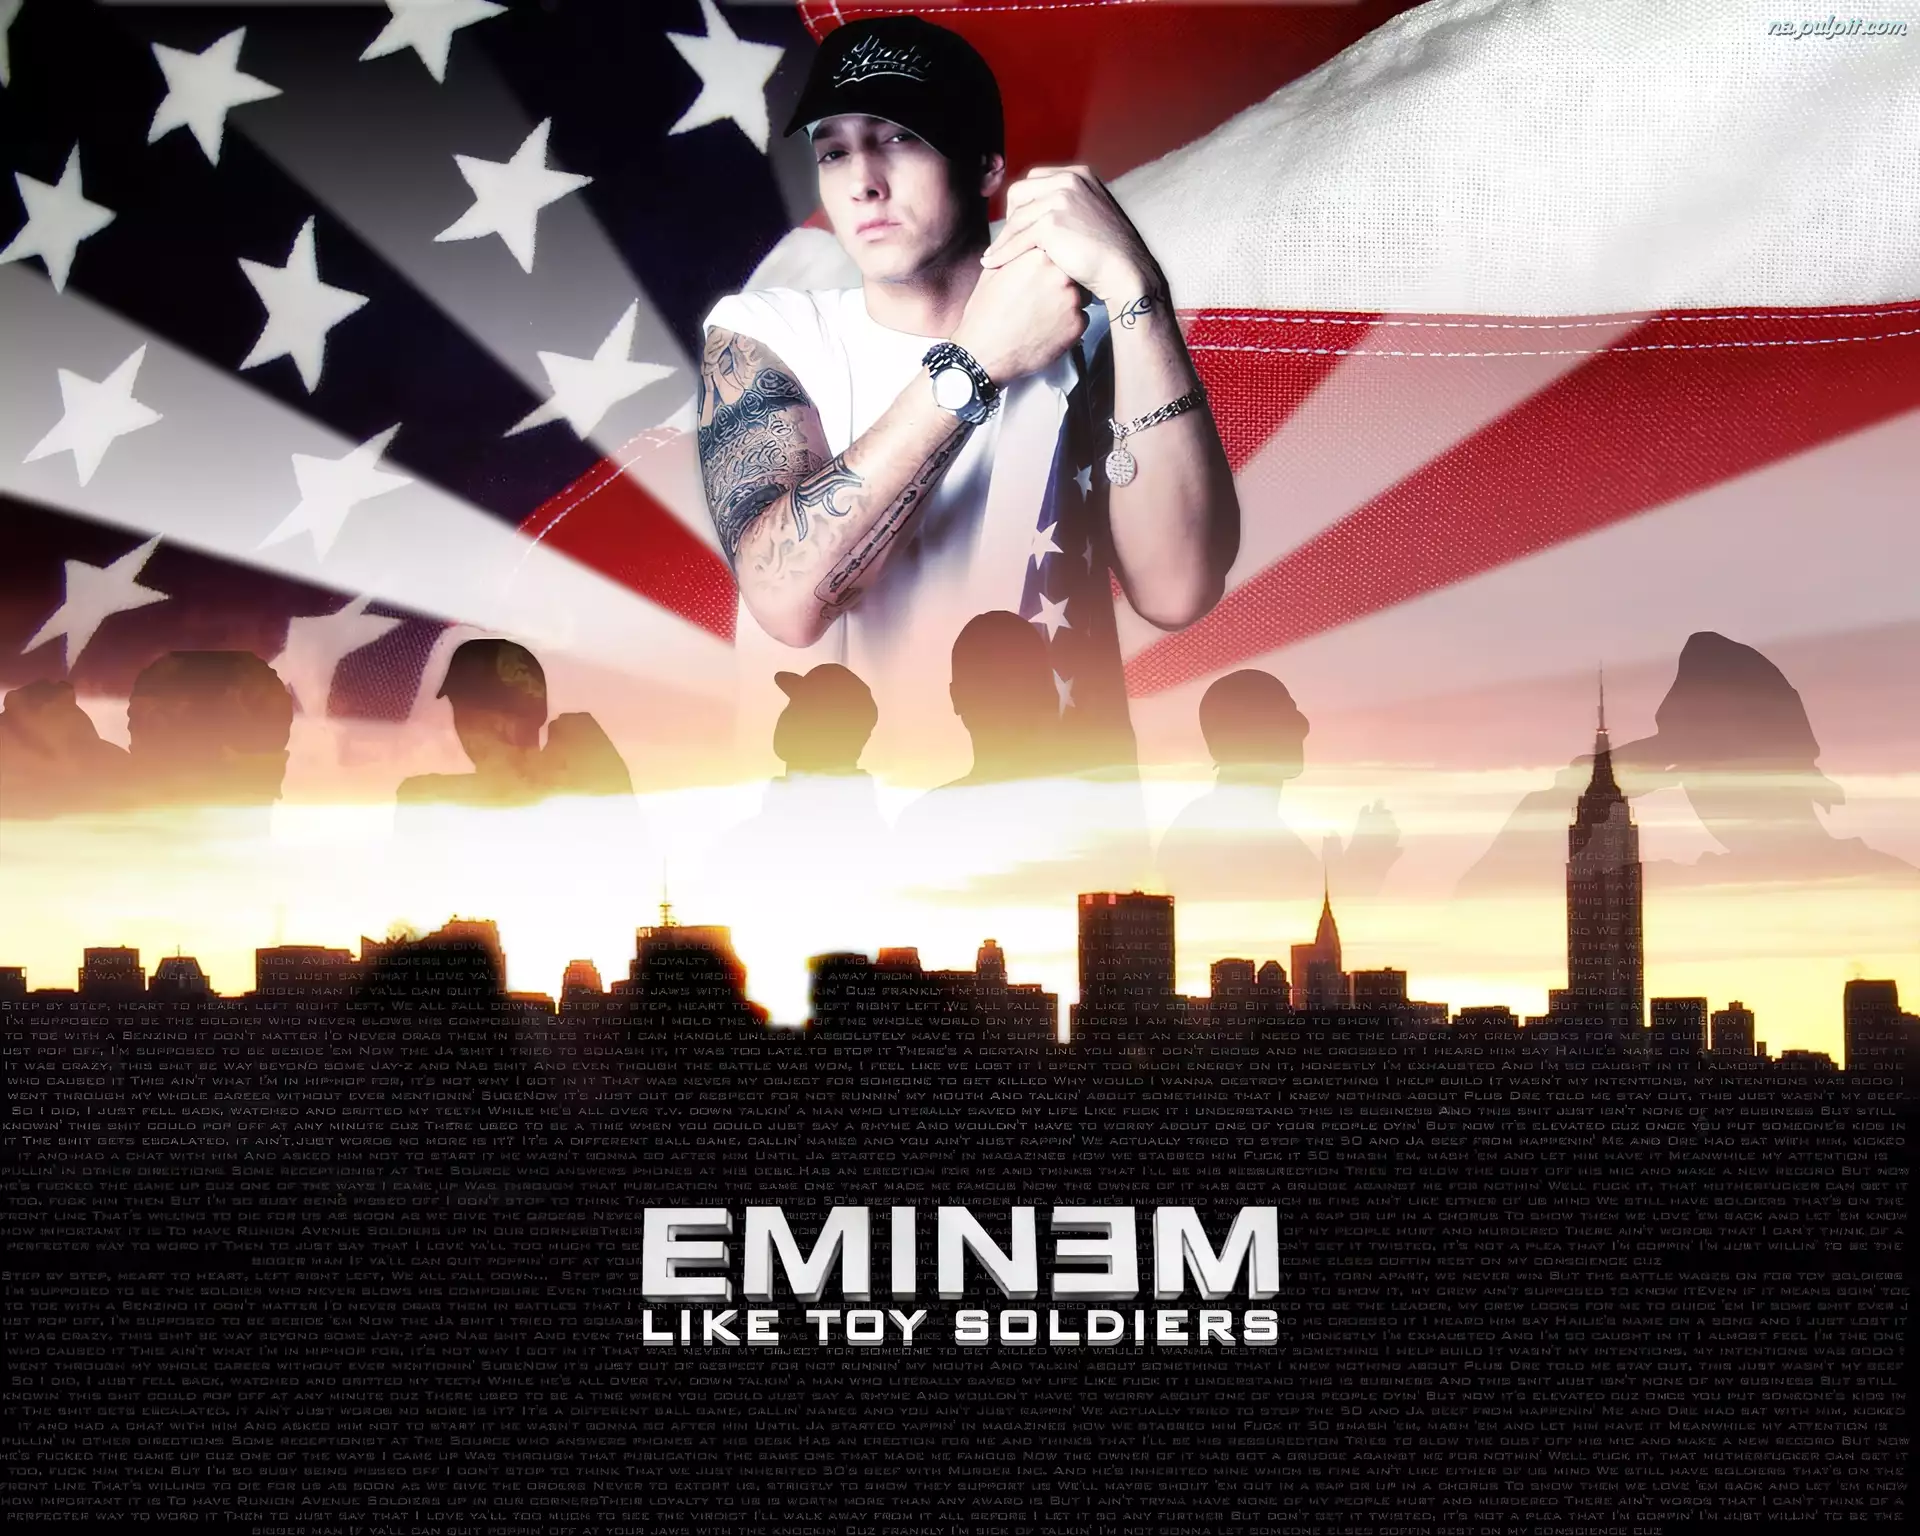 Soldiers, Eminem, Like, Toy